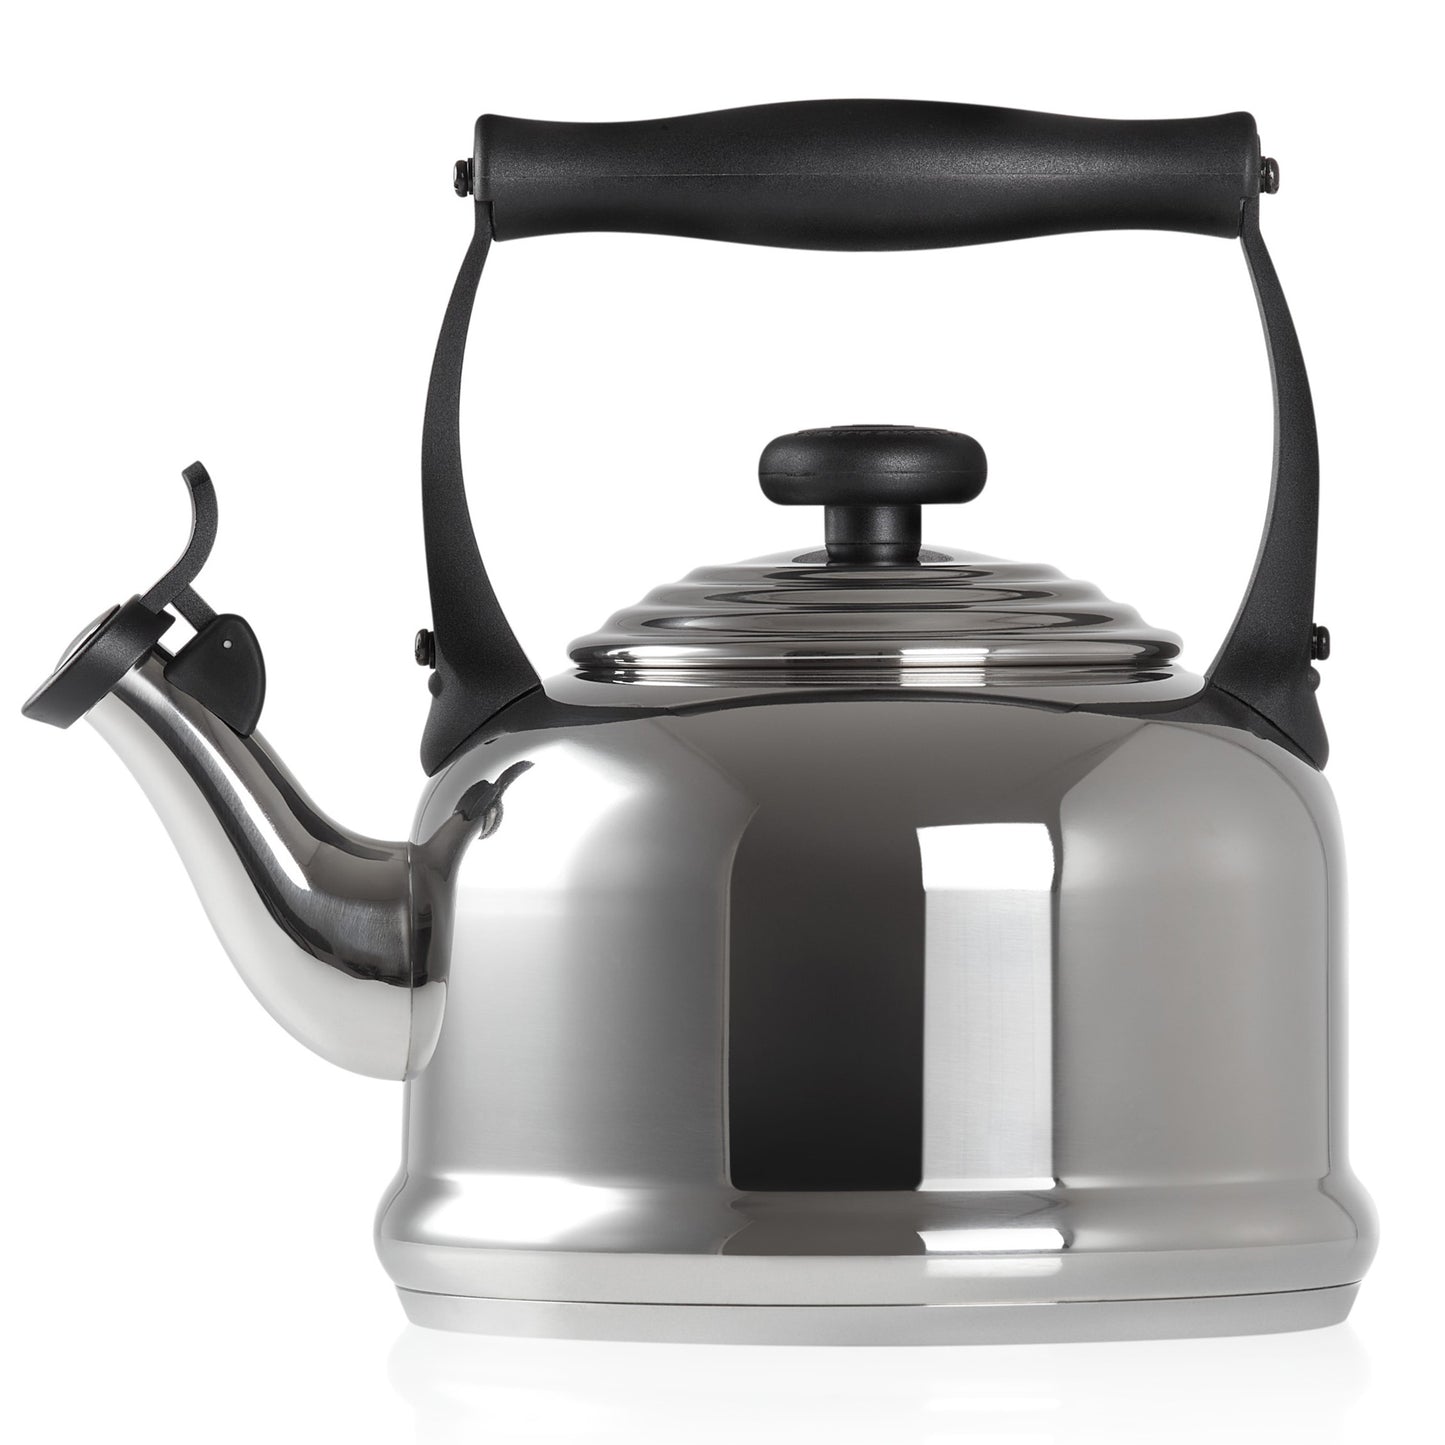 A stainless steel kettle with a black handle